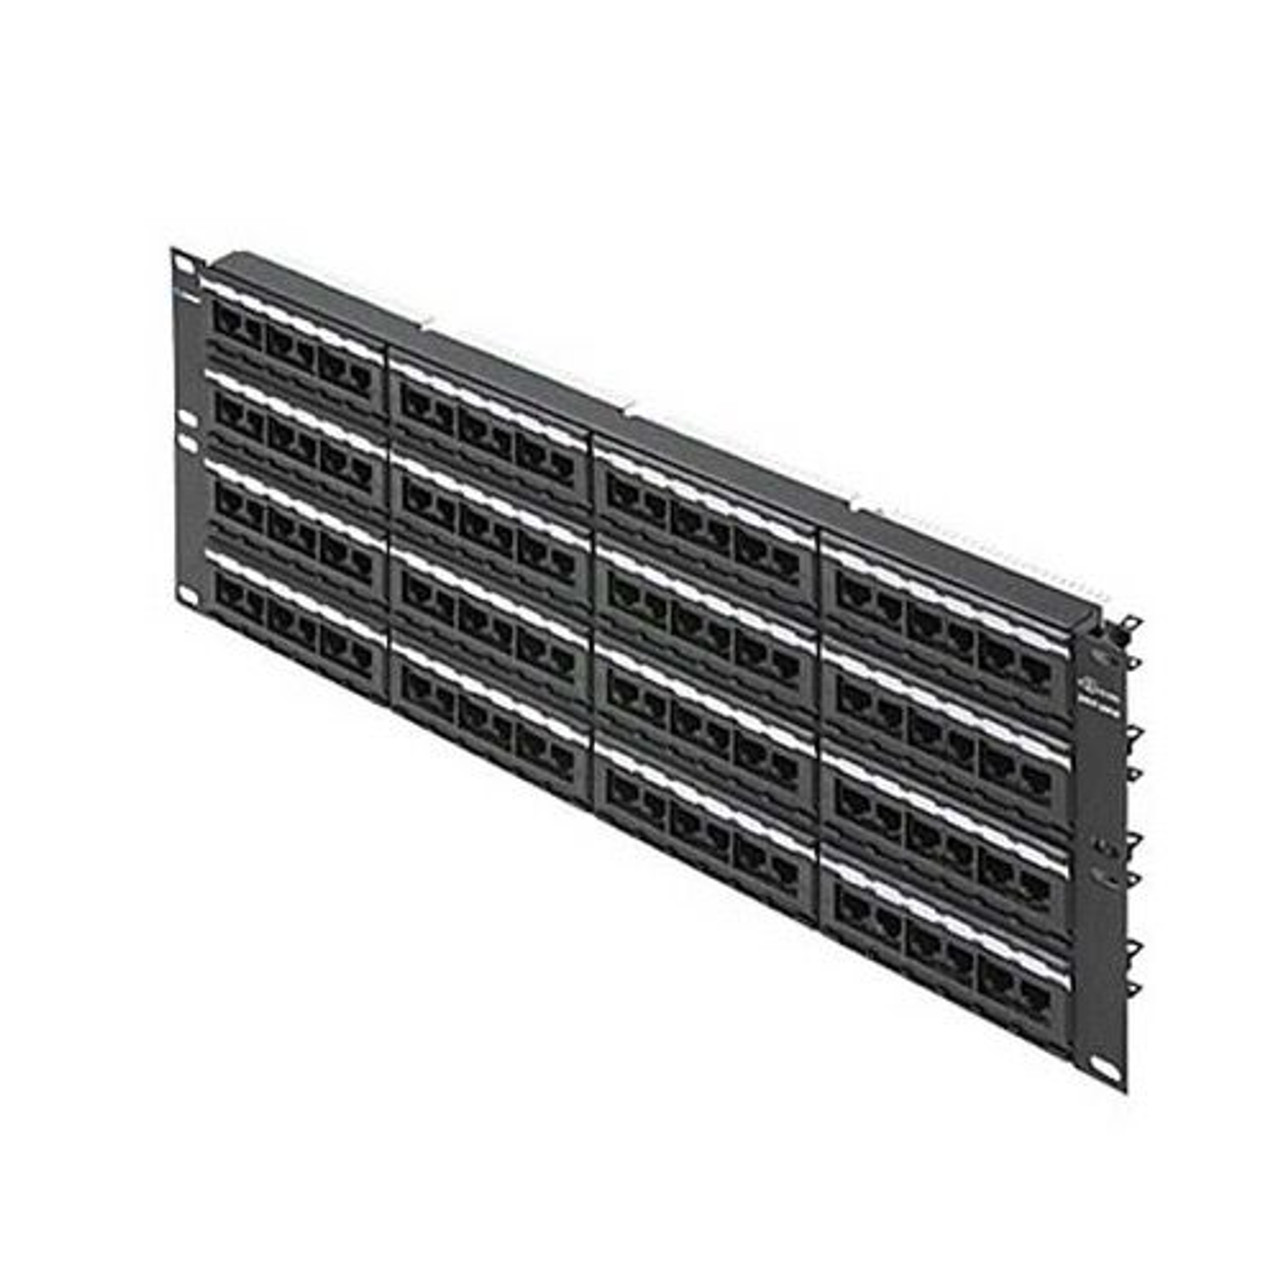 Eagle 96 Port Patch Panel CAT5E RJ45 110 Type Horizontal 19" Inch Rack Mount UL Listed 568 A/B Compatible Network Termination with Punch Down Tool AWG 22 - 26 Tin Lead Nickel Contact RJ-45 CAT-5E, Conforms to ANSI/TIA/EIA 568 Standard